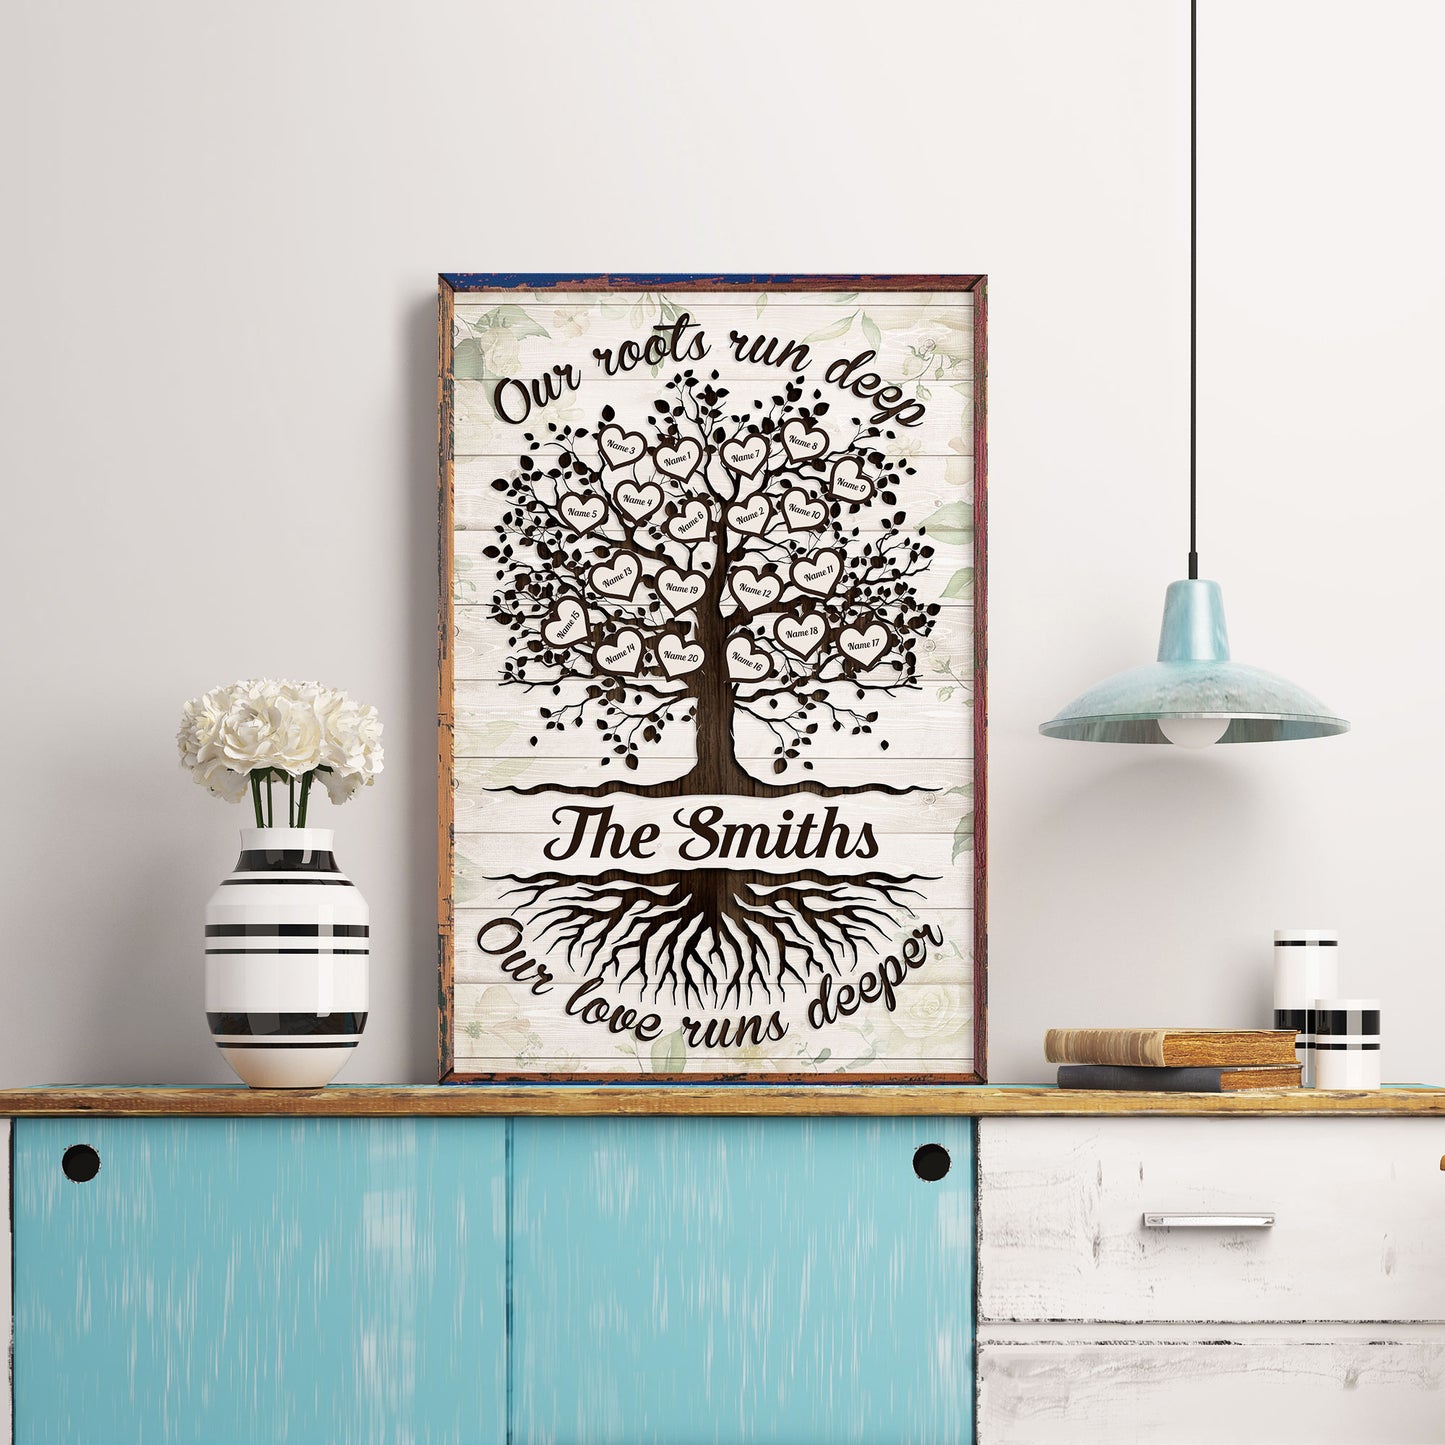 Our Roots And Love Run Deep - Personalized Poster/Wrapped Canvas - Anniversary Gift For Family